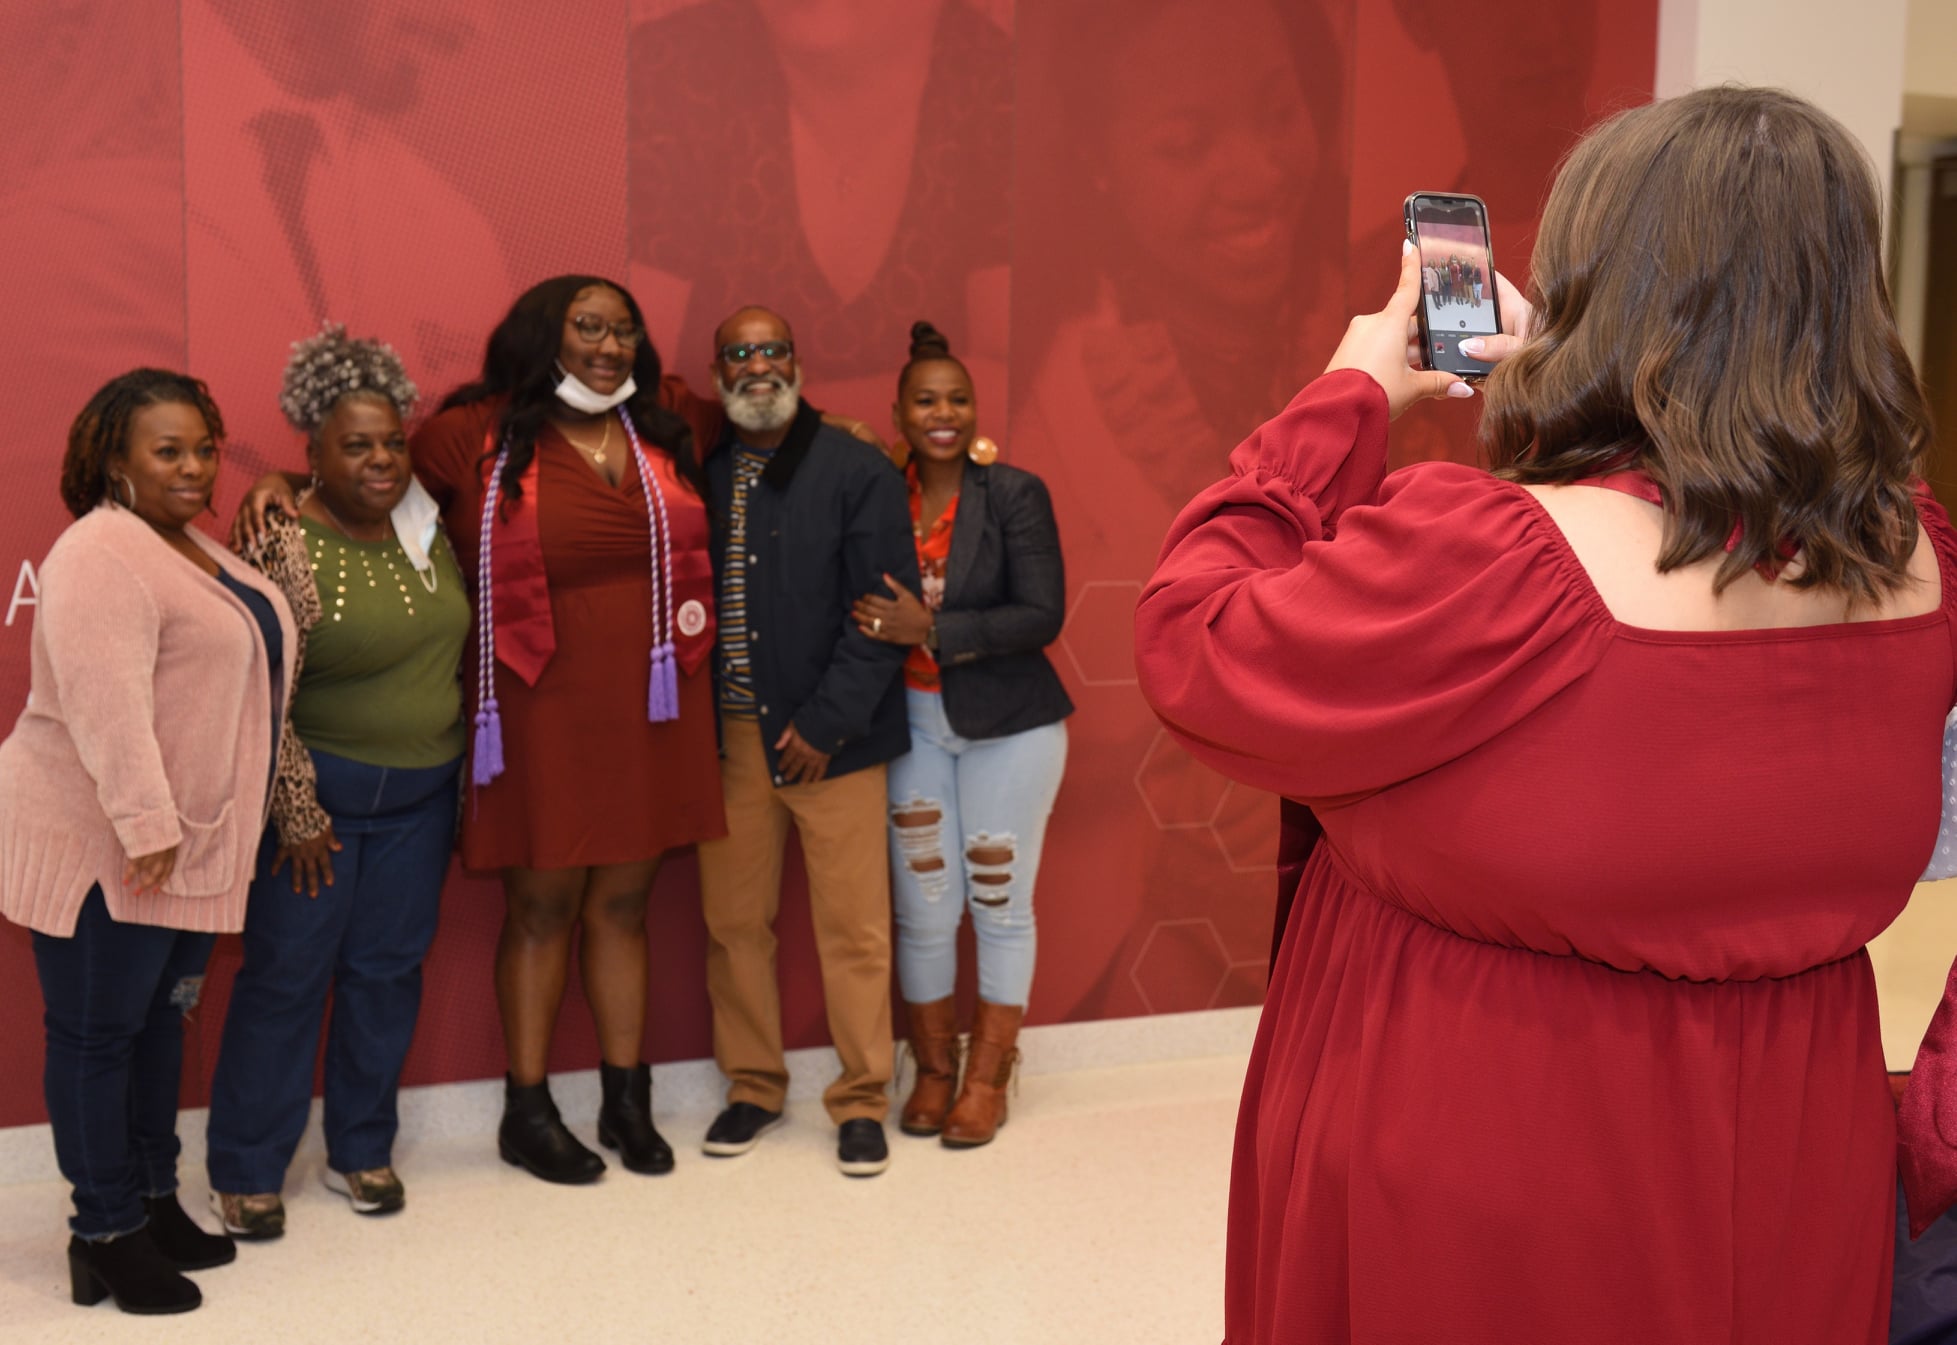 Woman taking a photo of a group at graduation